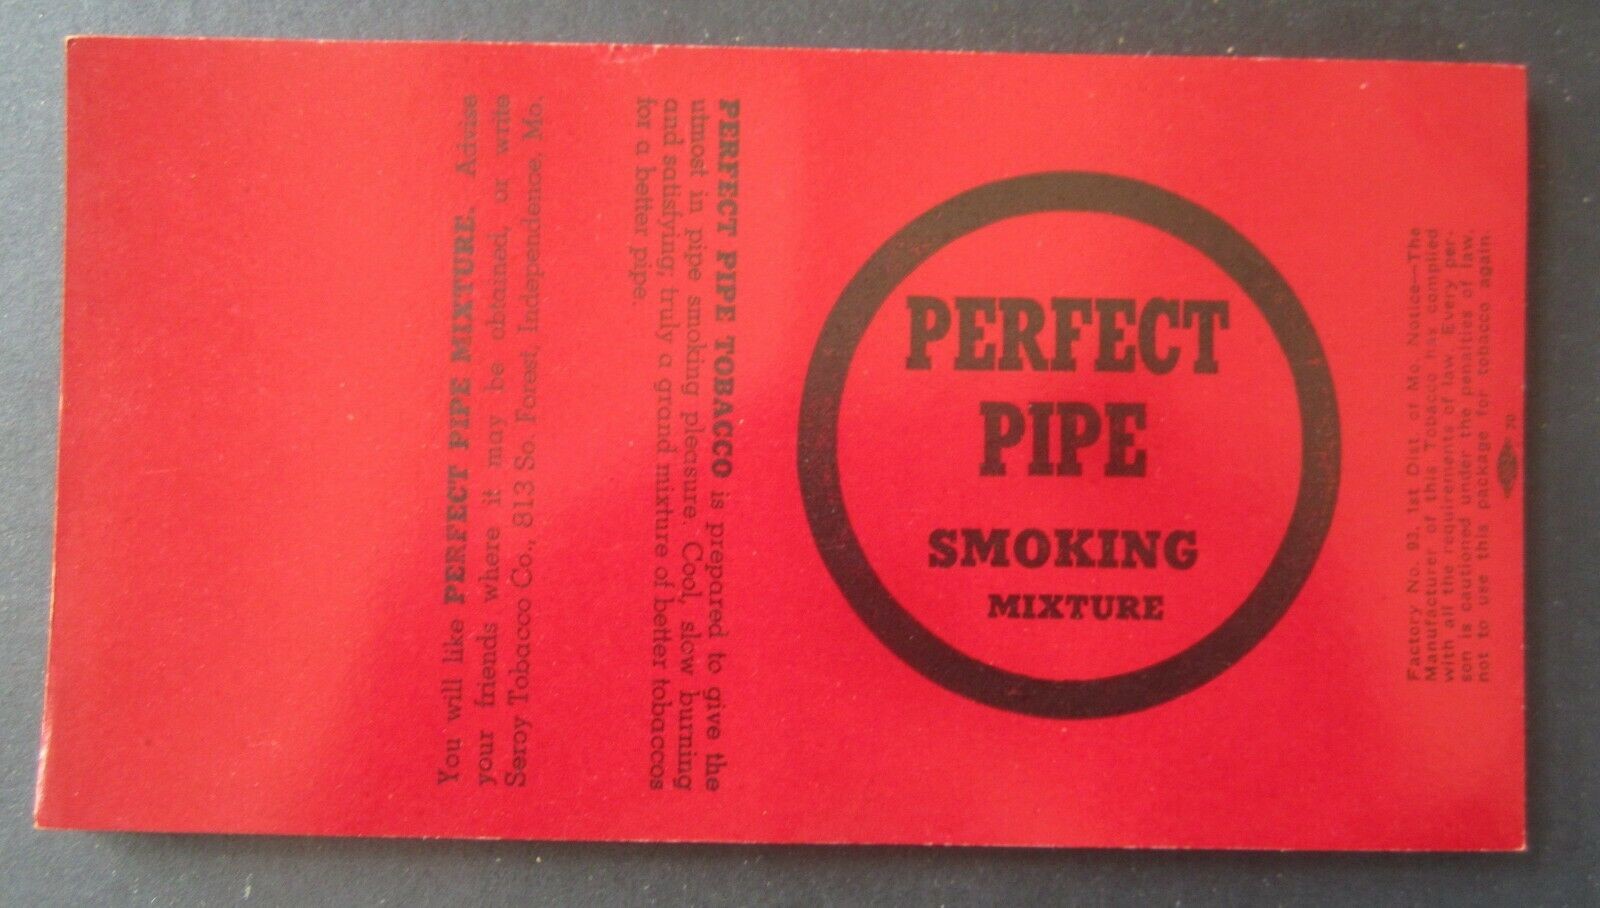  Lot of 50 Old - PERFECT PIPE Smoking TOBACCO L...